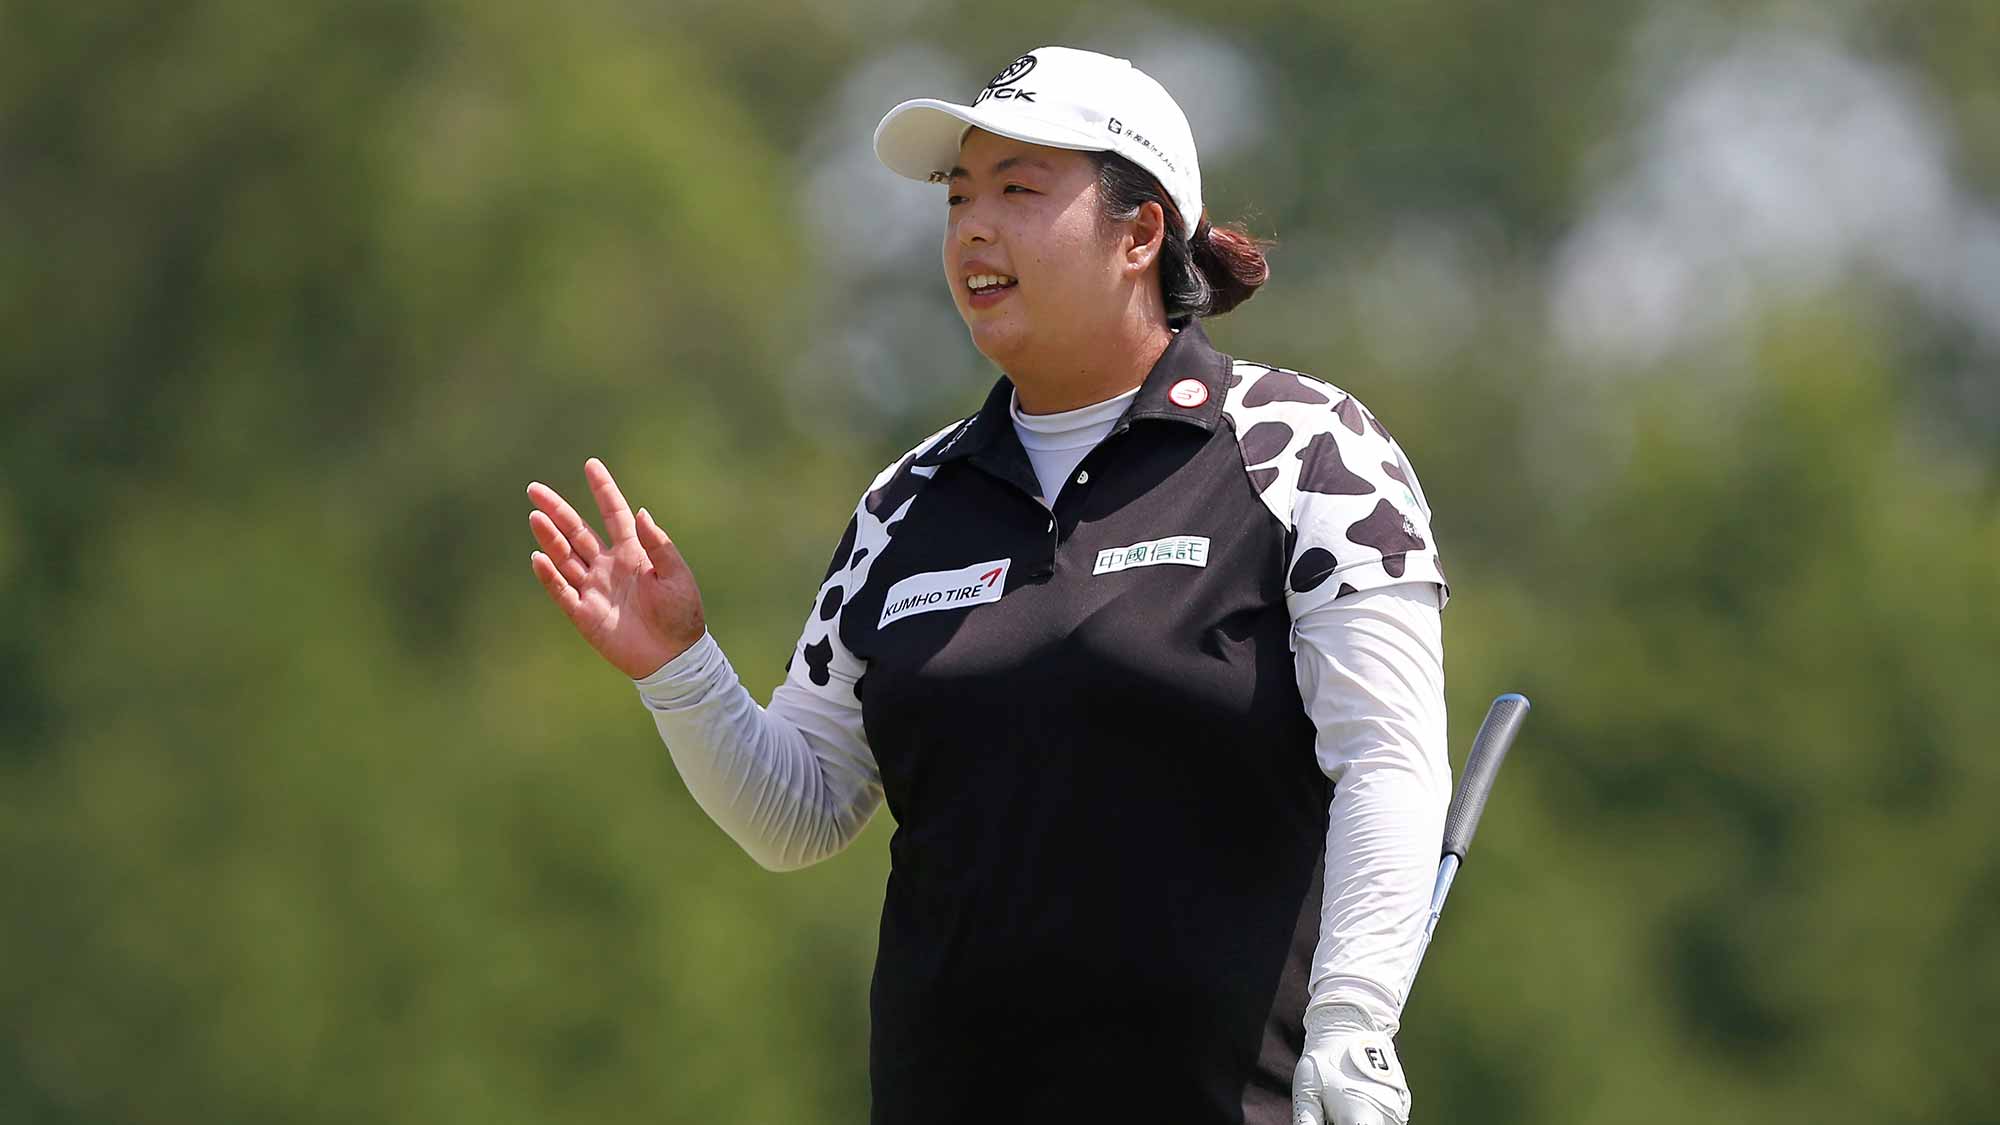 Shanshan Feng of China reacts after making a putt on the first hole during the final round of the U.S. Women's Open Championship at Trump National Golf Club